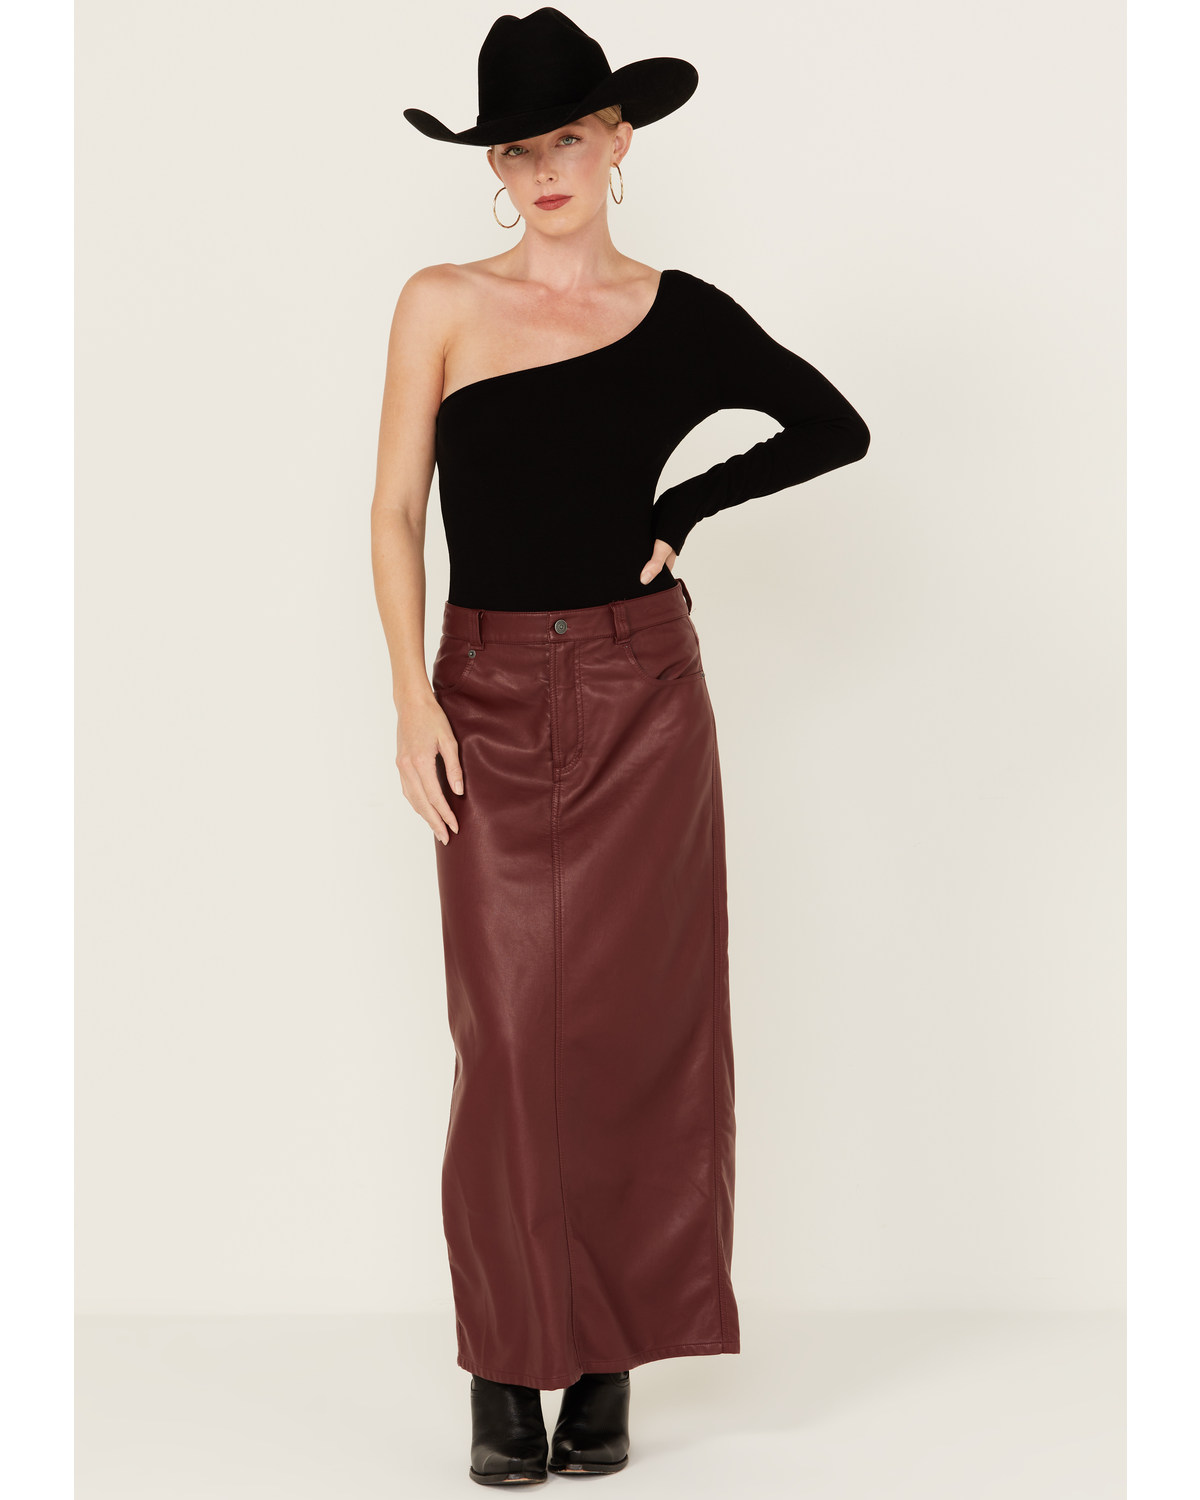 Free People Women's City Slicker Faux Leather Maxi Skirt